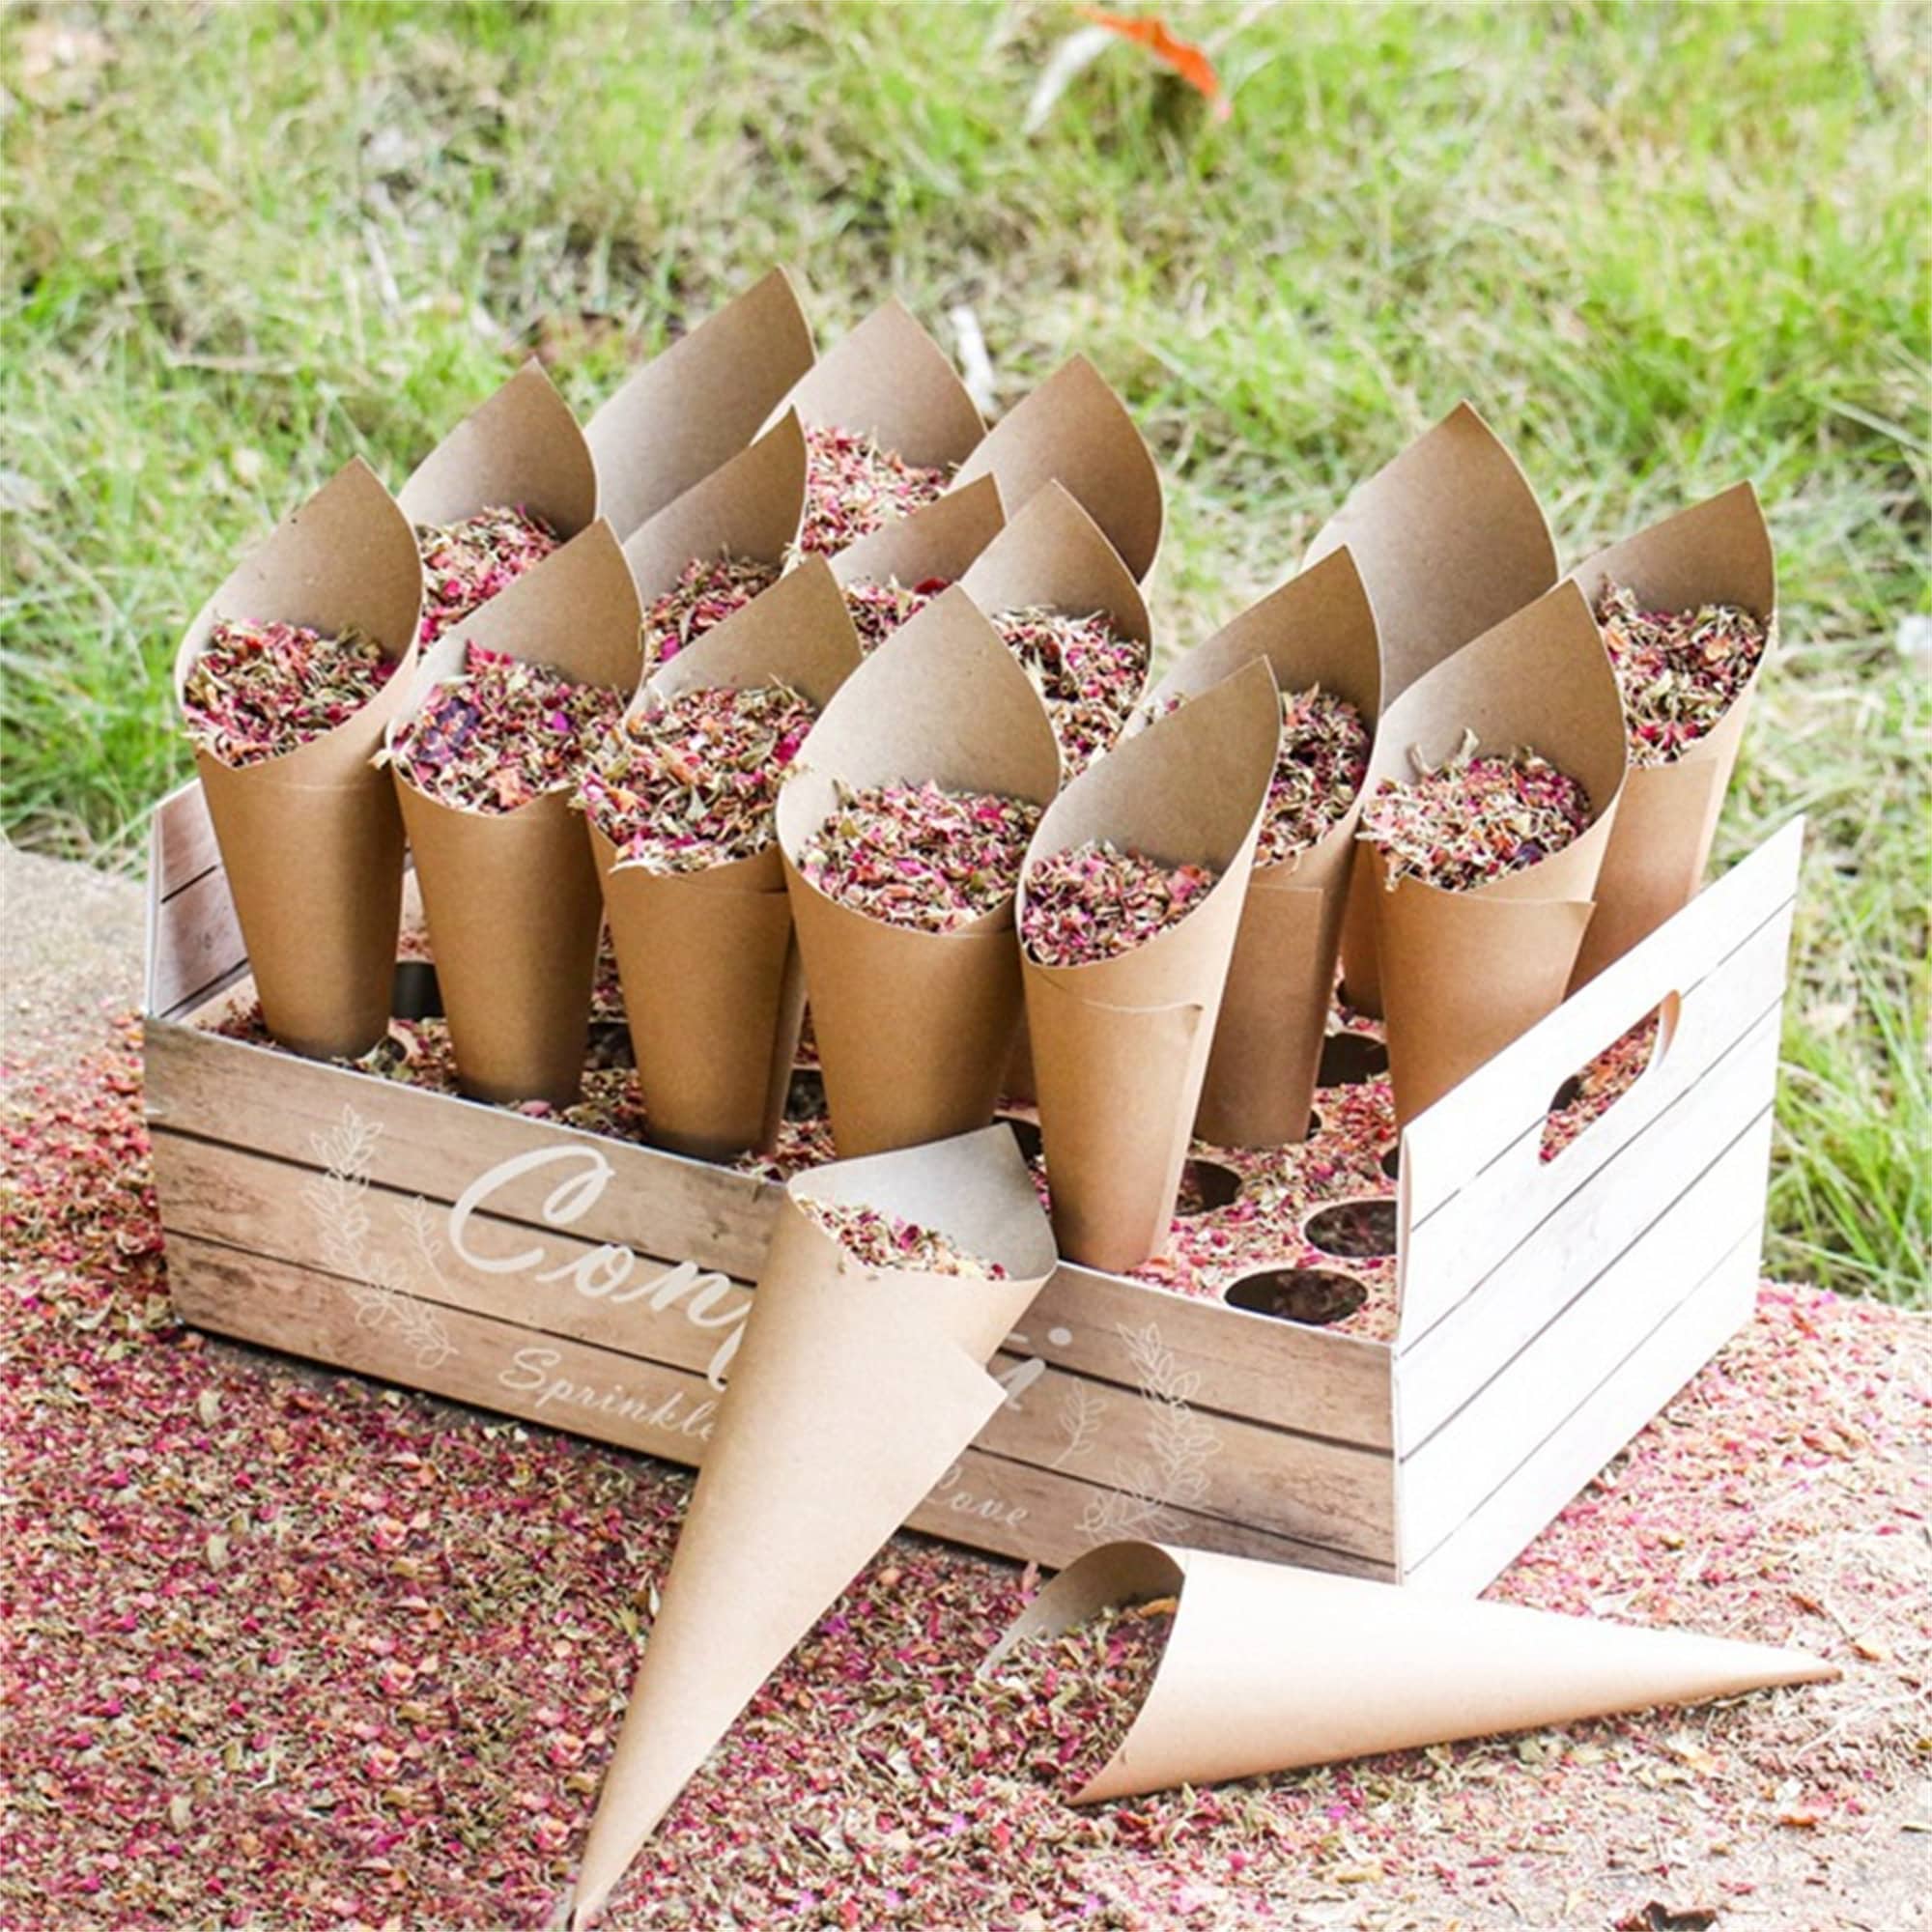  Bekecidi 30 Pieces biodegradable confetti Cones and Stand Tray  Paper Cone Box 30 Holes Suitable Placing Dried Flower Petals Confetti for  Wedding, Engagement, Party, Birthday (Flower) : Home & Kitchen